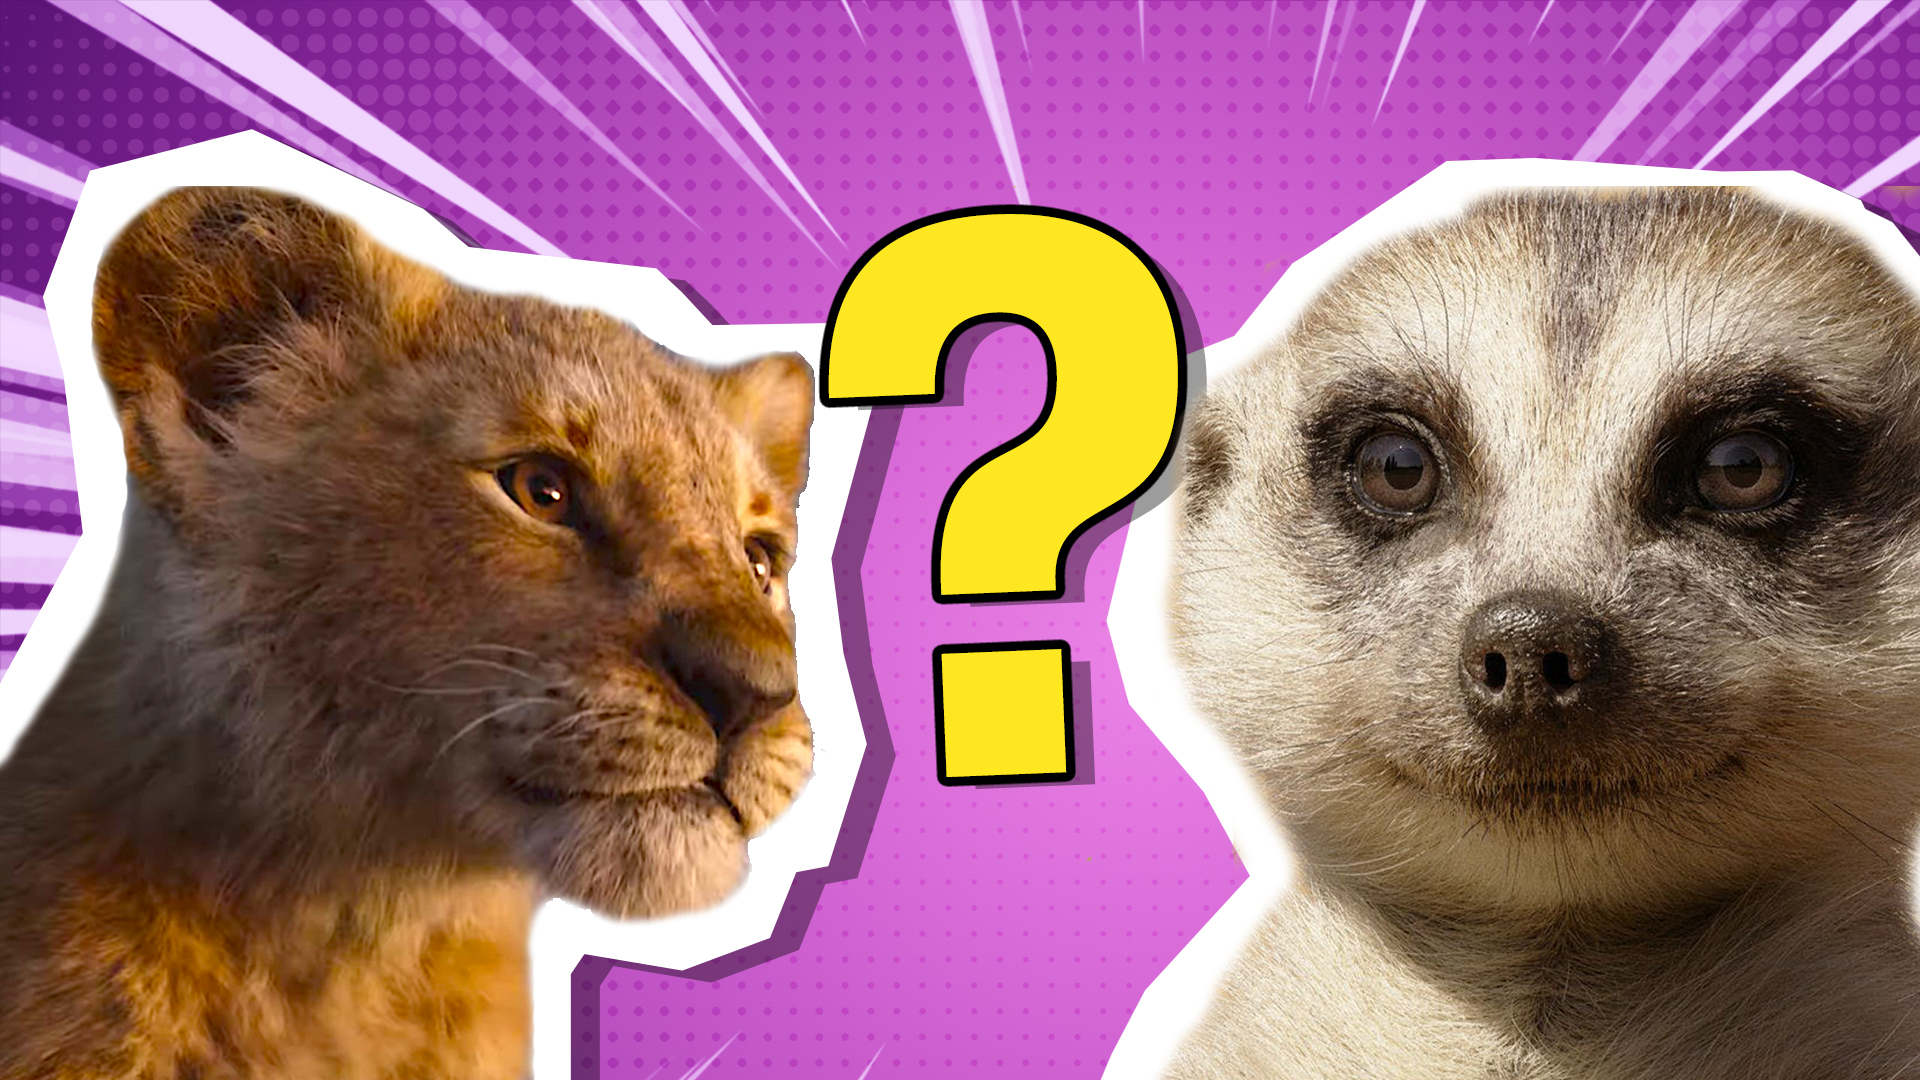 The Lion King personality quiz